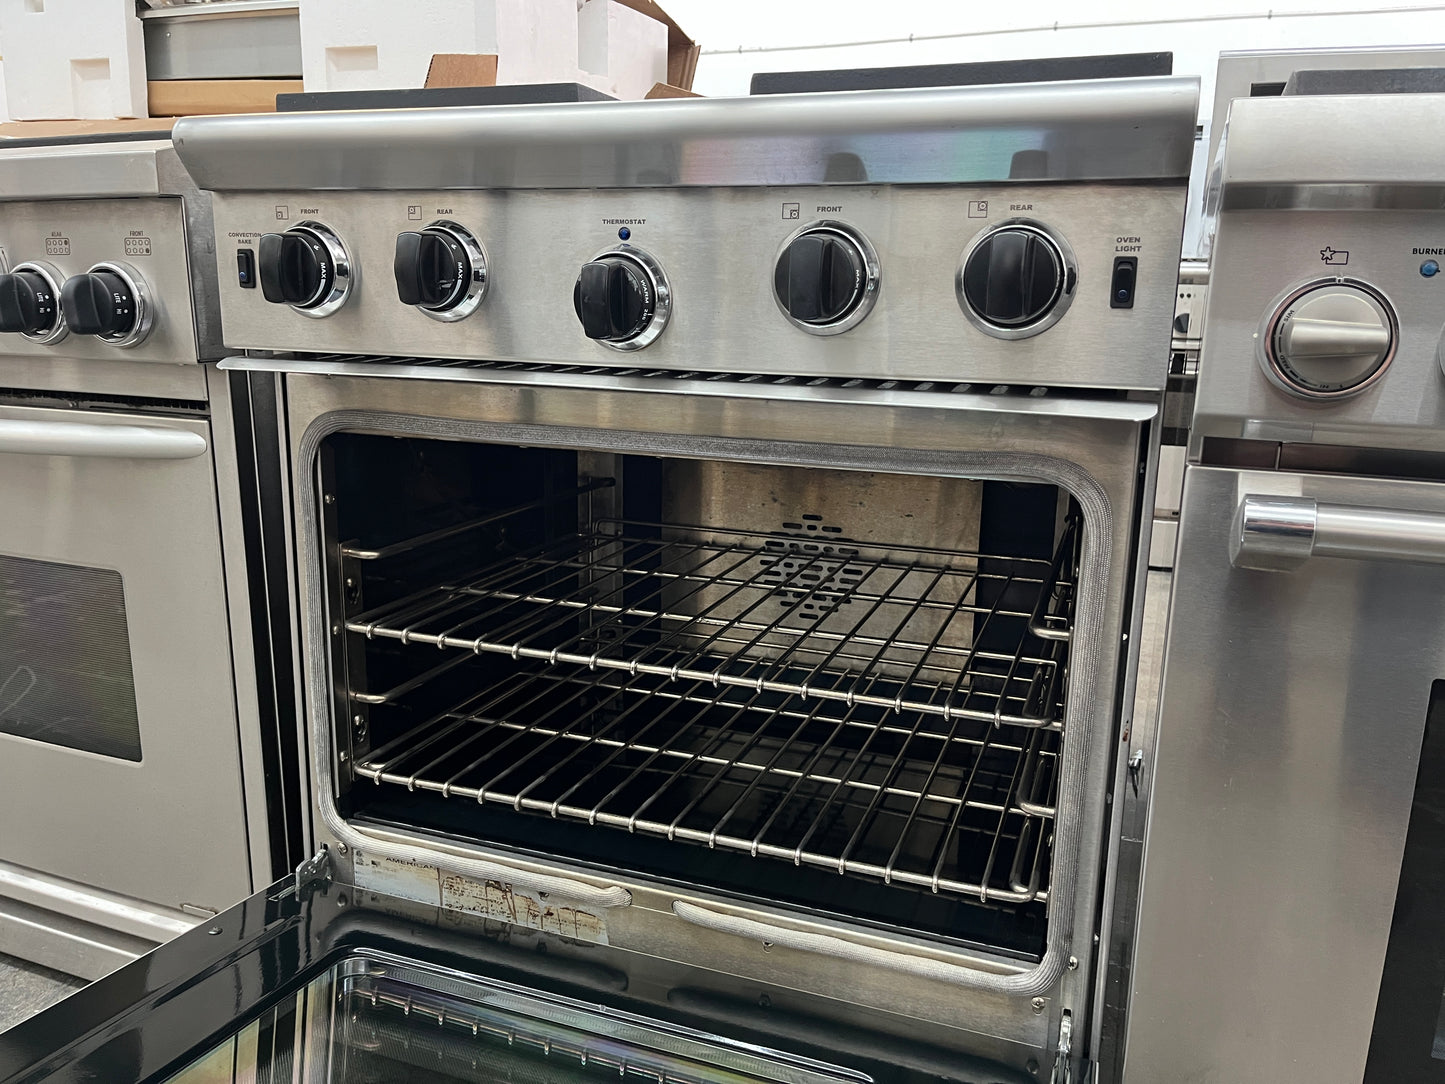 30 Inch American Range Gas ARROB-430 4-Burner,Convection Oven, Stainless Steel 444100